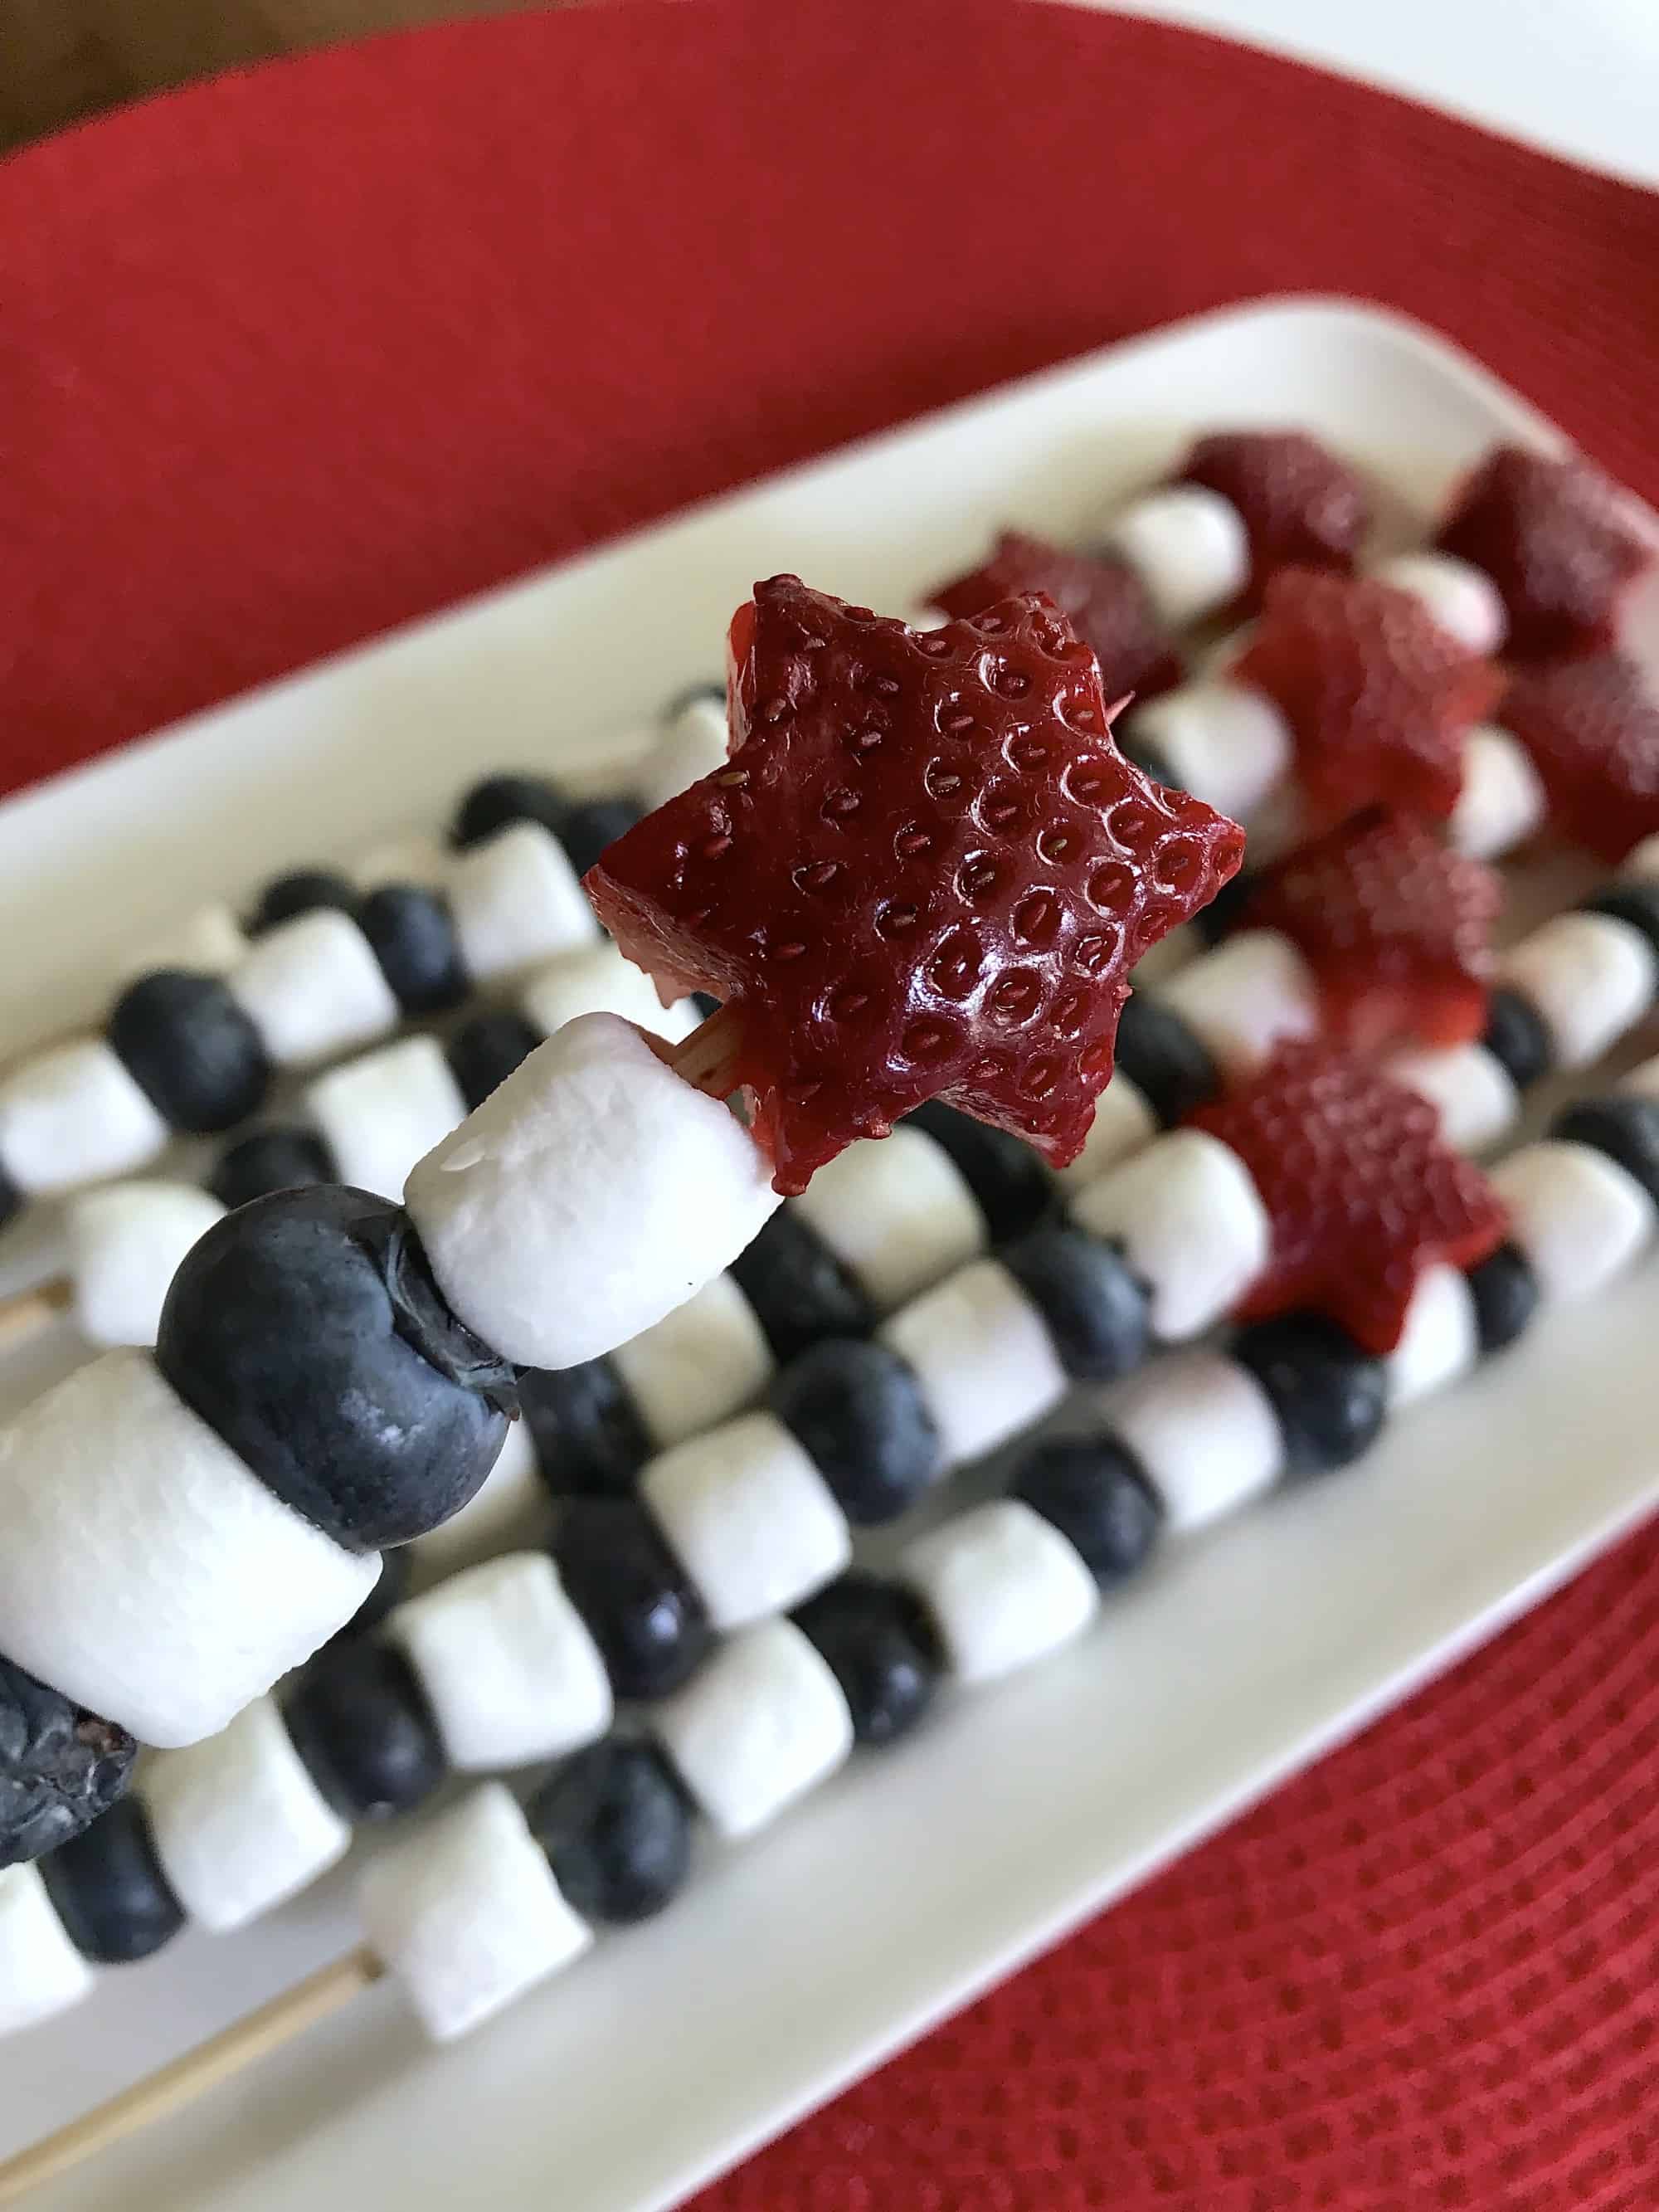 How To Make 4th of July Fruit Kebabs